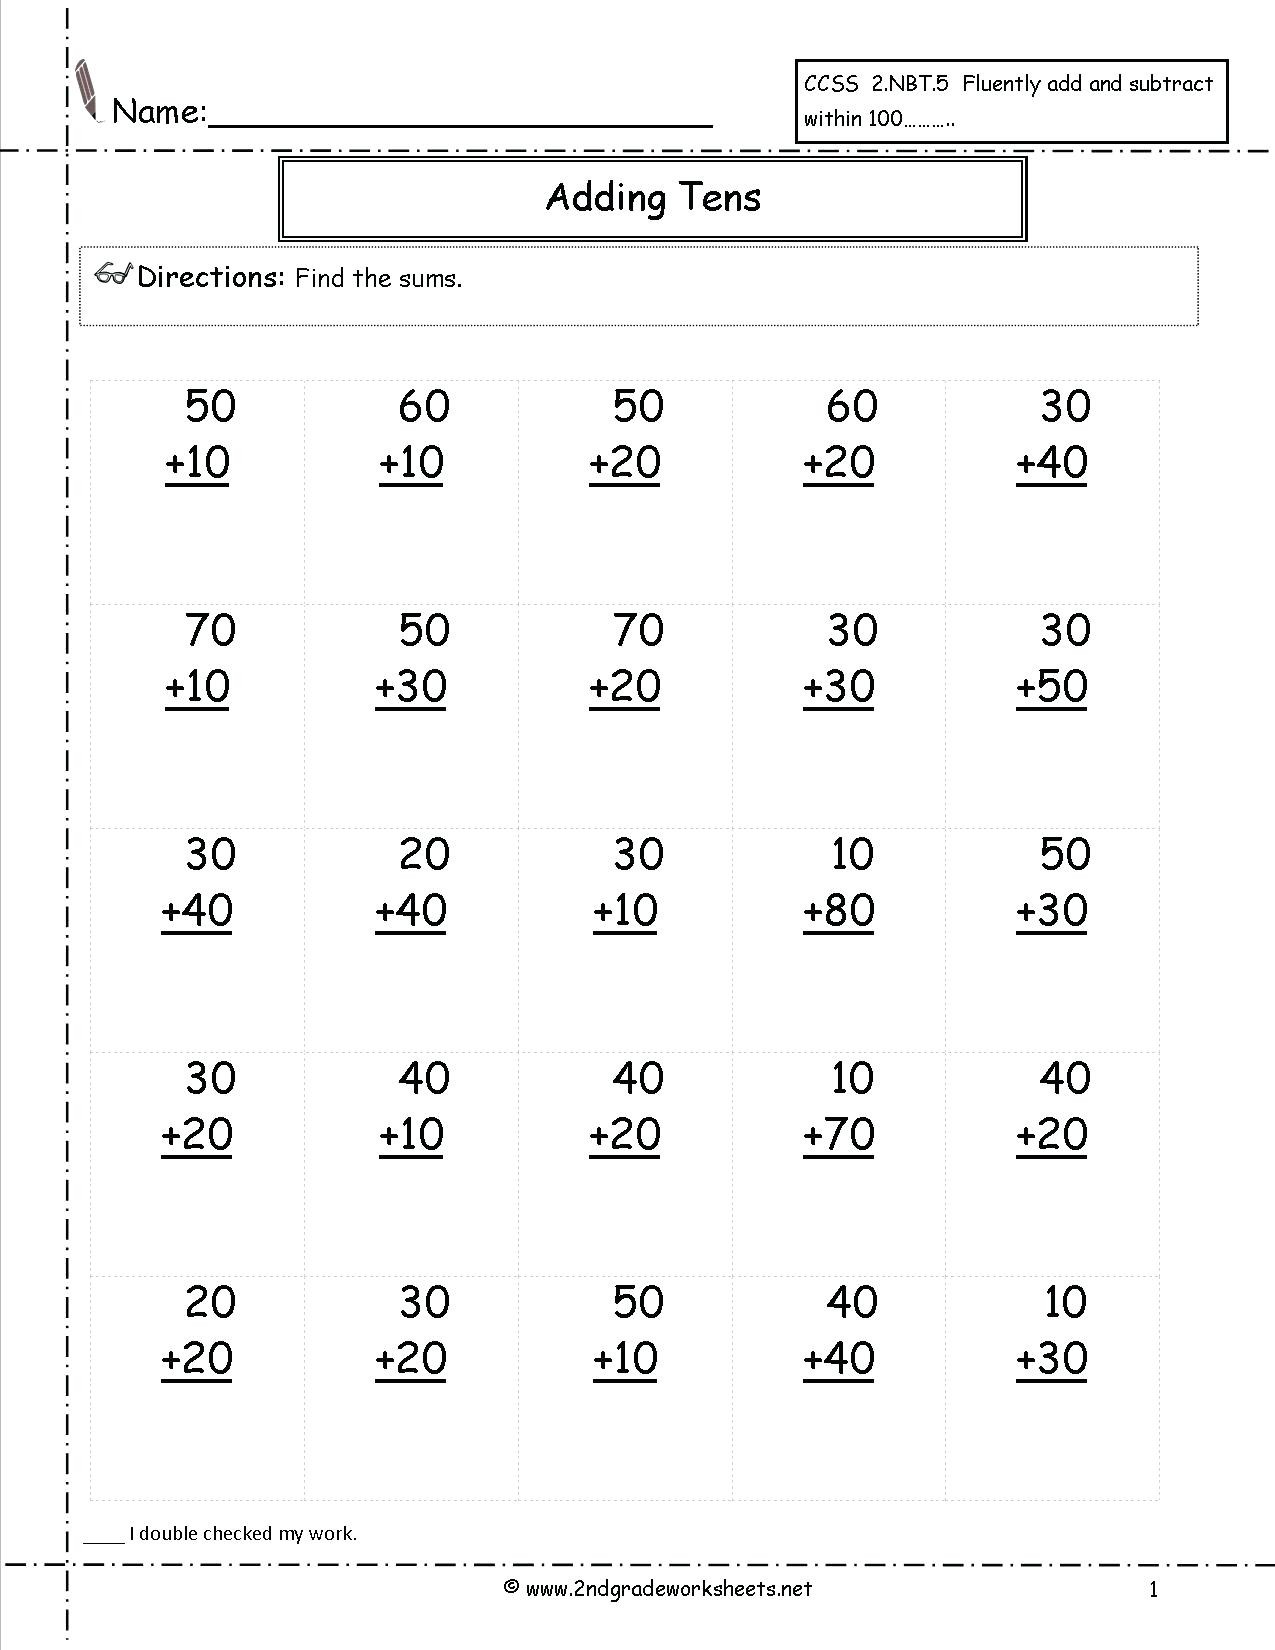 Free Math Worksheets Second Grade 2 Subtraction Subtract 3 Digit Missing Numbers No Regrouping